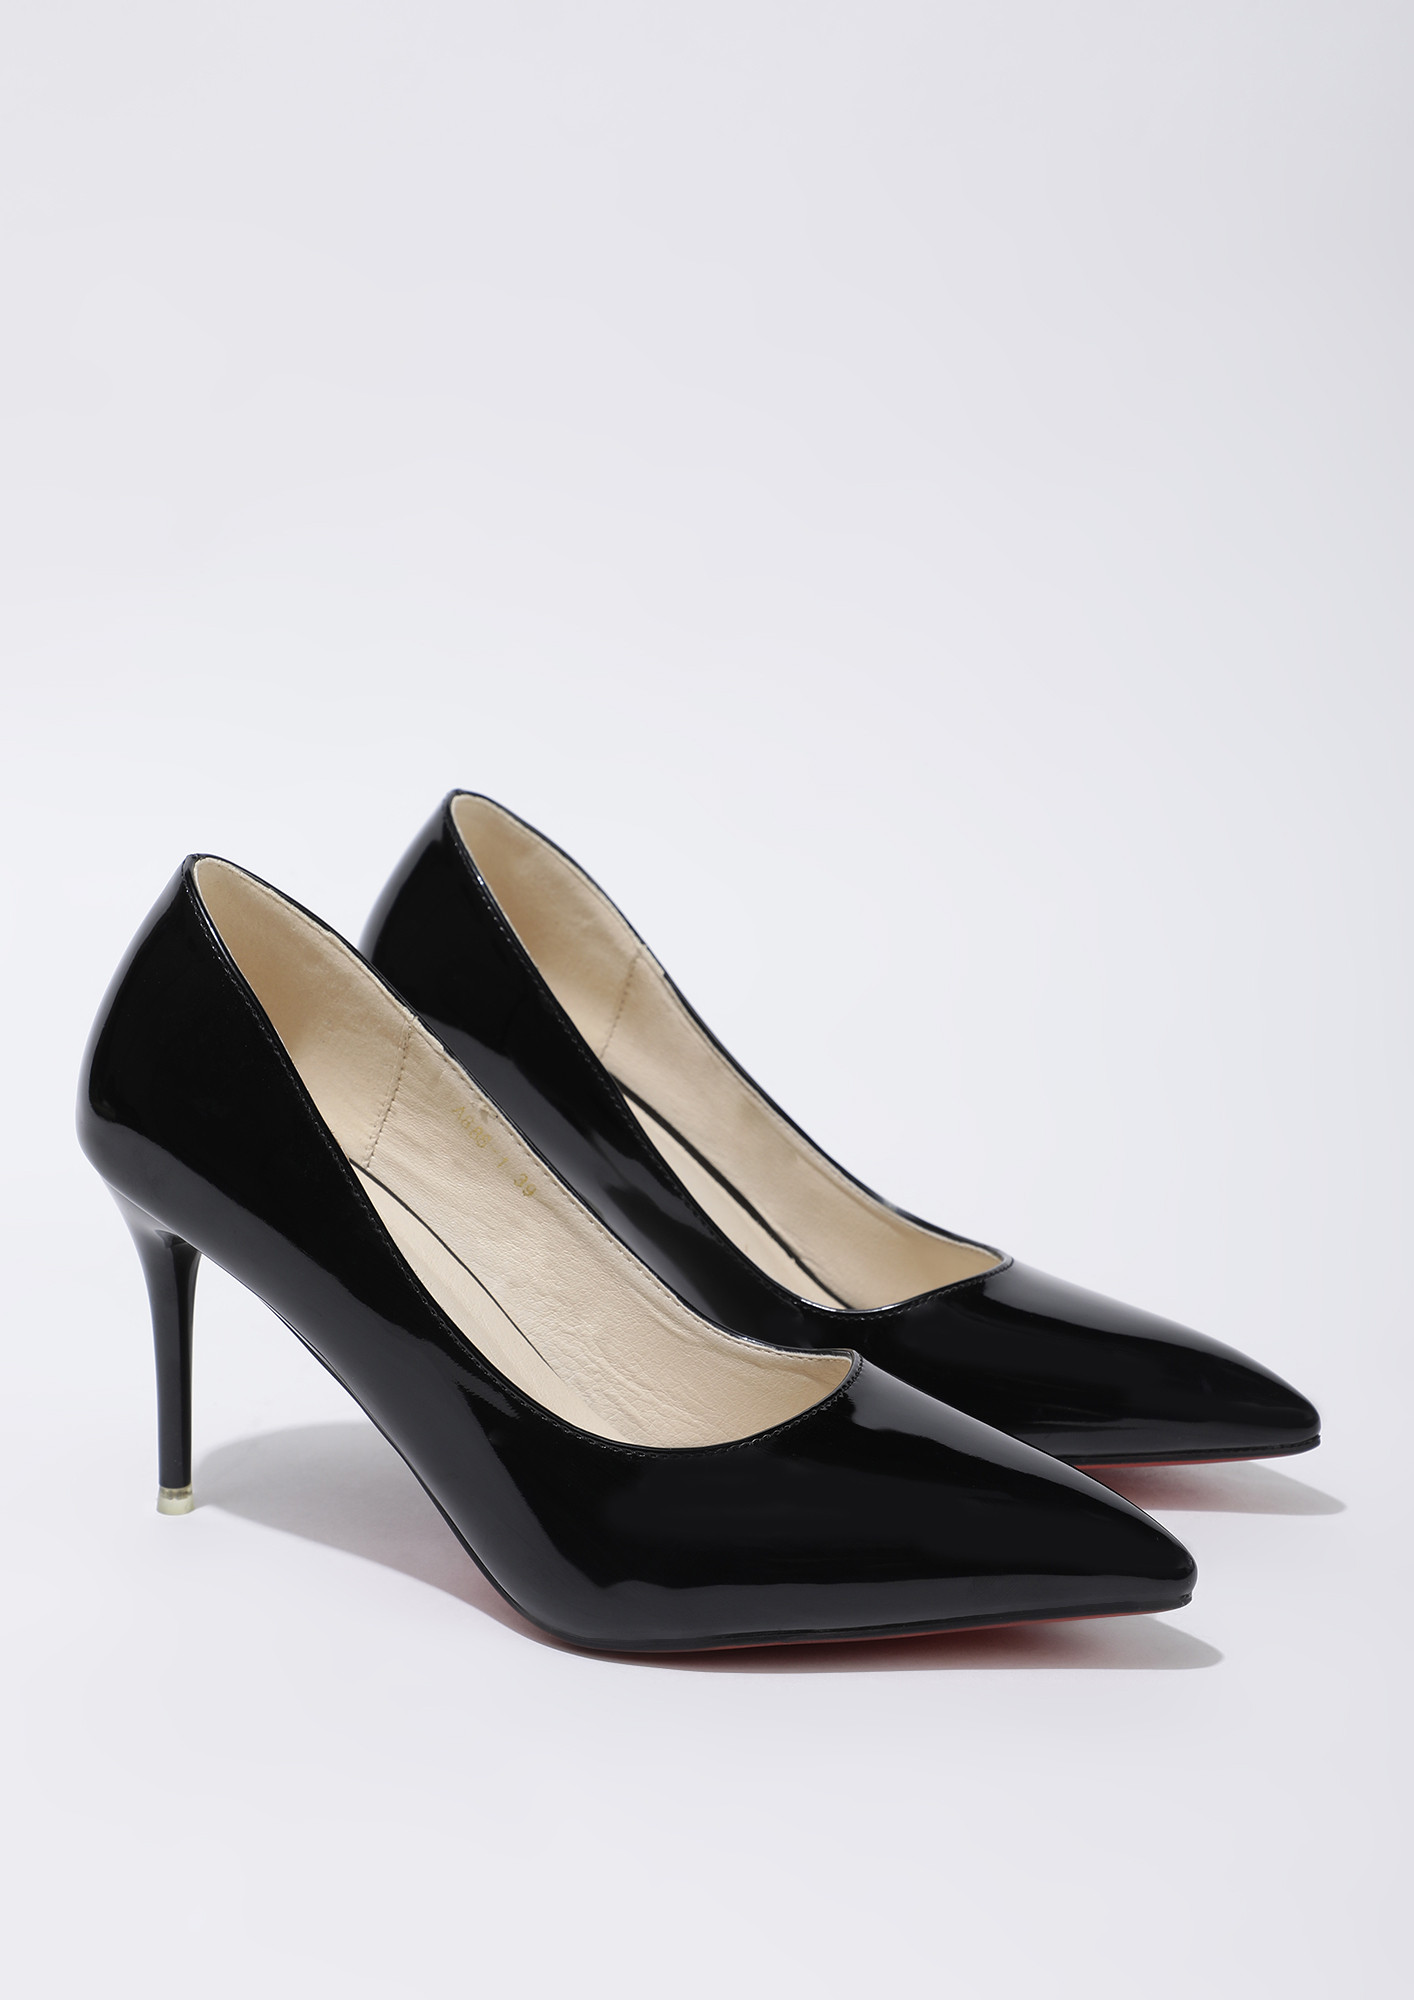 Black With High Heels Shoes Slightly Pointed Toe Tip Atelier Yuwa Ciao Jp